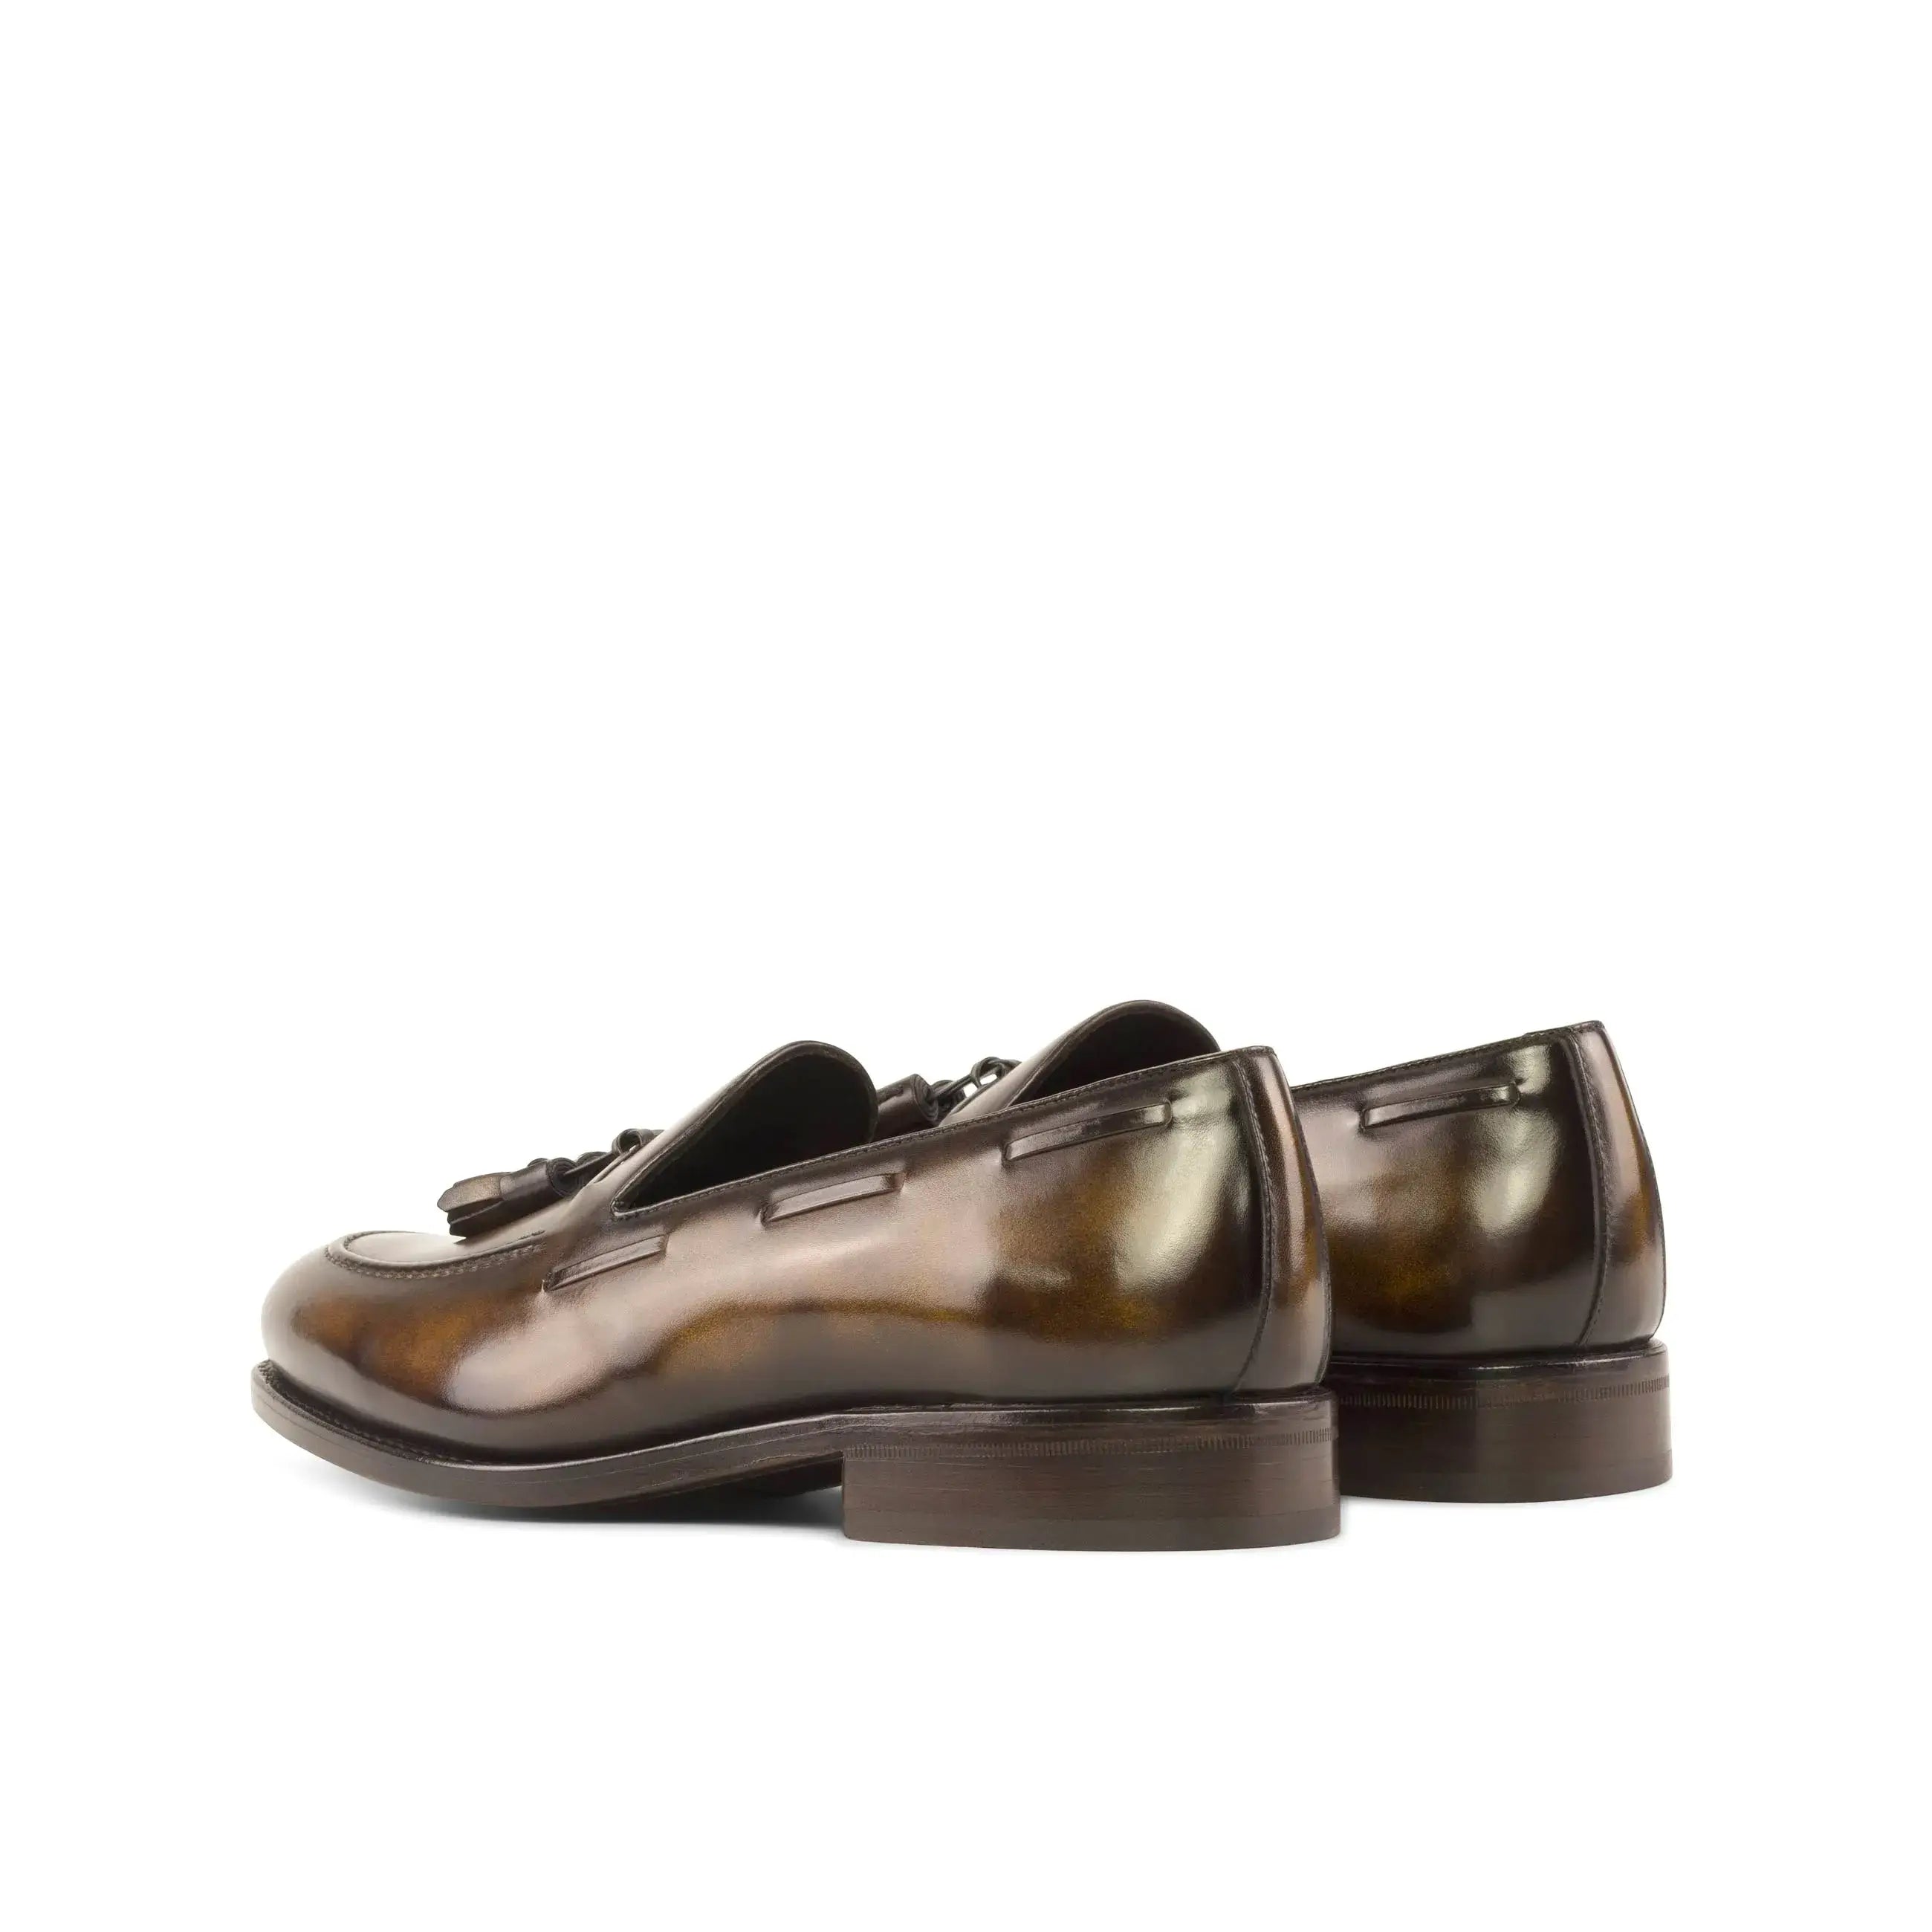 Loafer tobacco patina